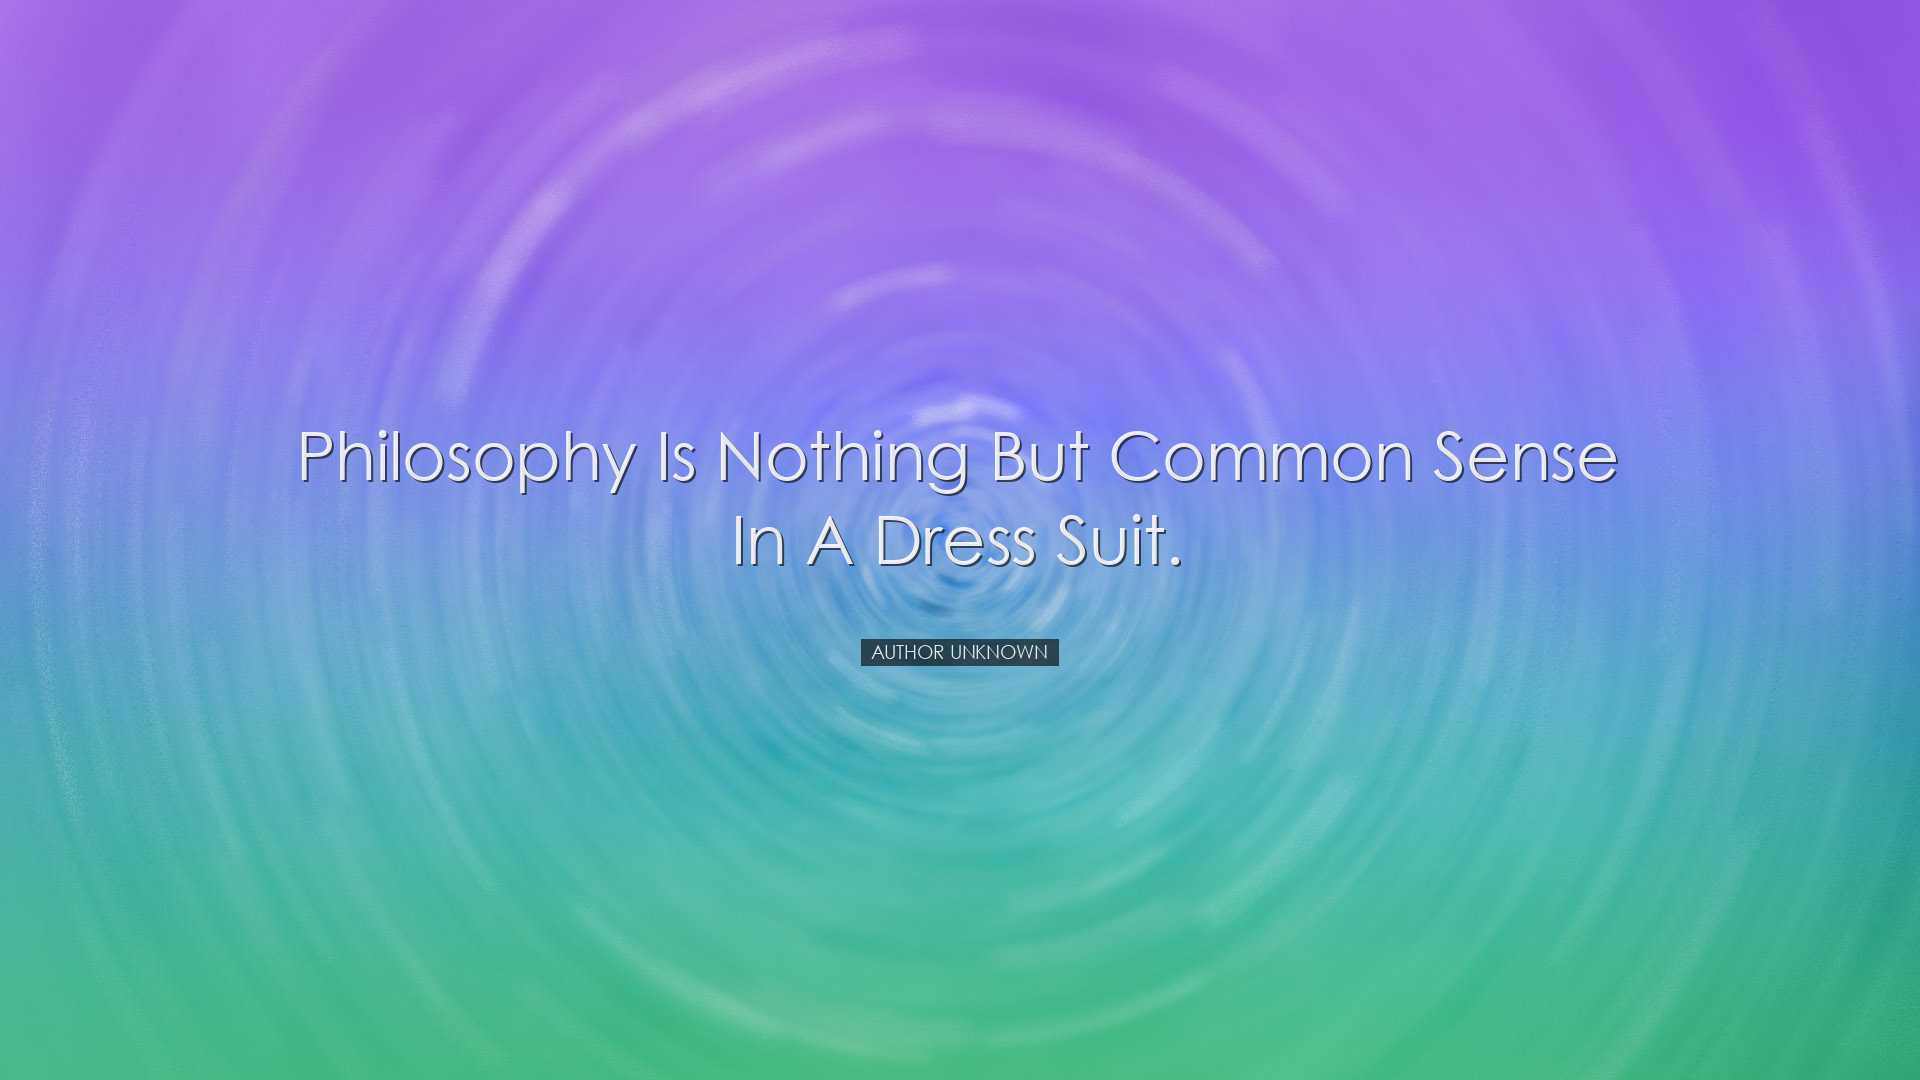 Philosophy is nothing but common sense in a dress suit. - Author u